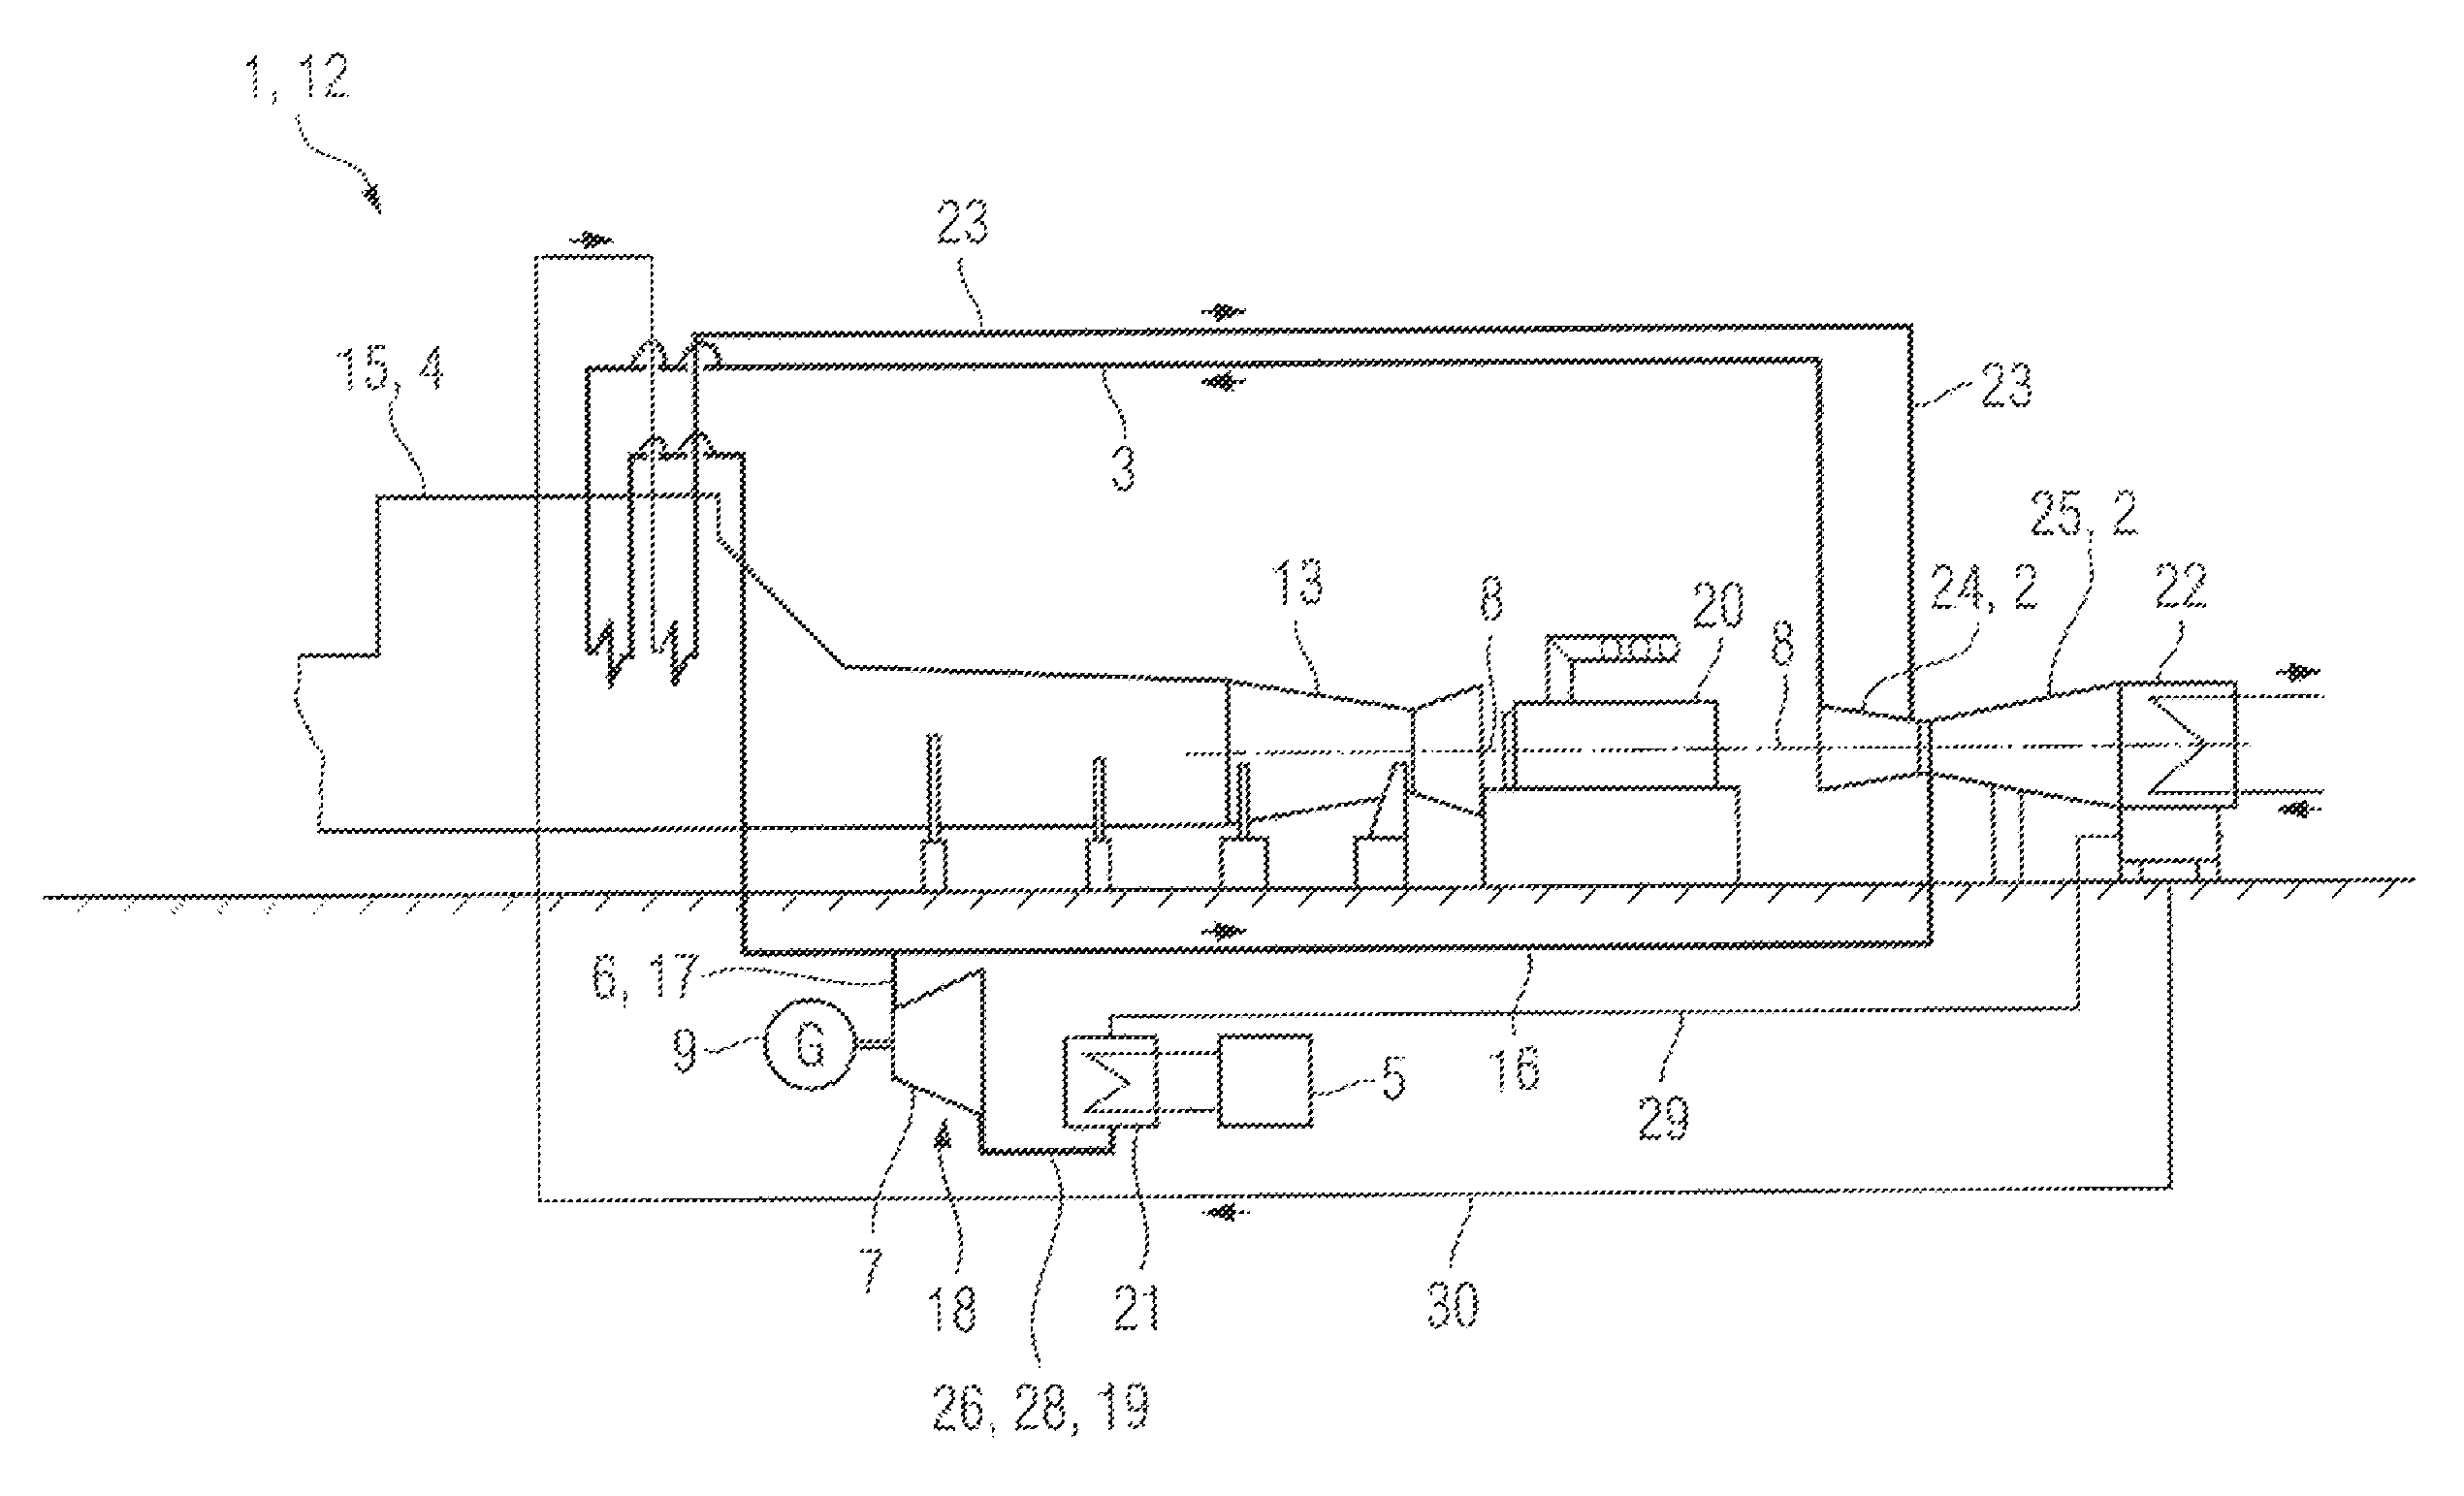 Fossil-fueled power station comprising a carbon dioxide separation device and method for operating a fossil-fueled power station